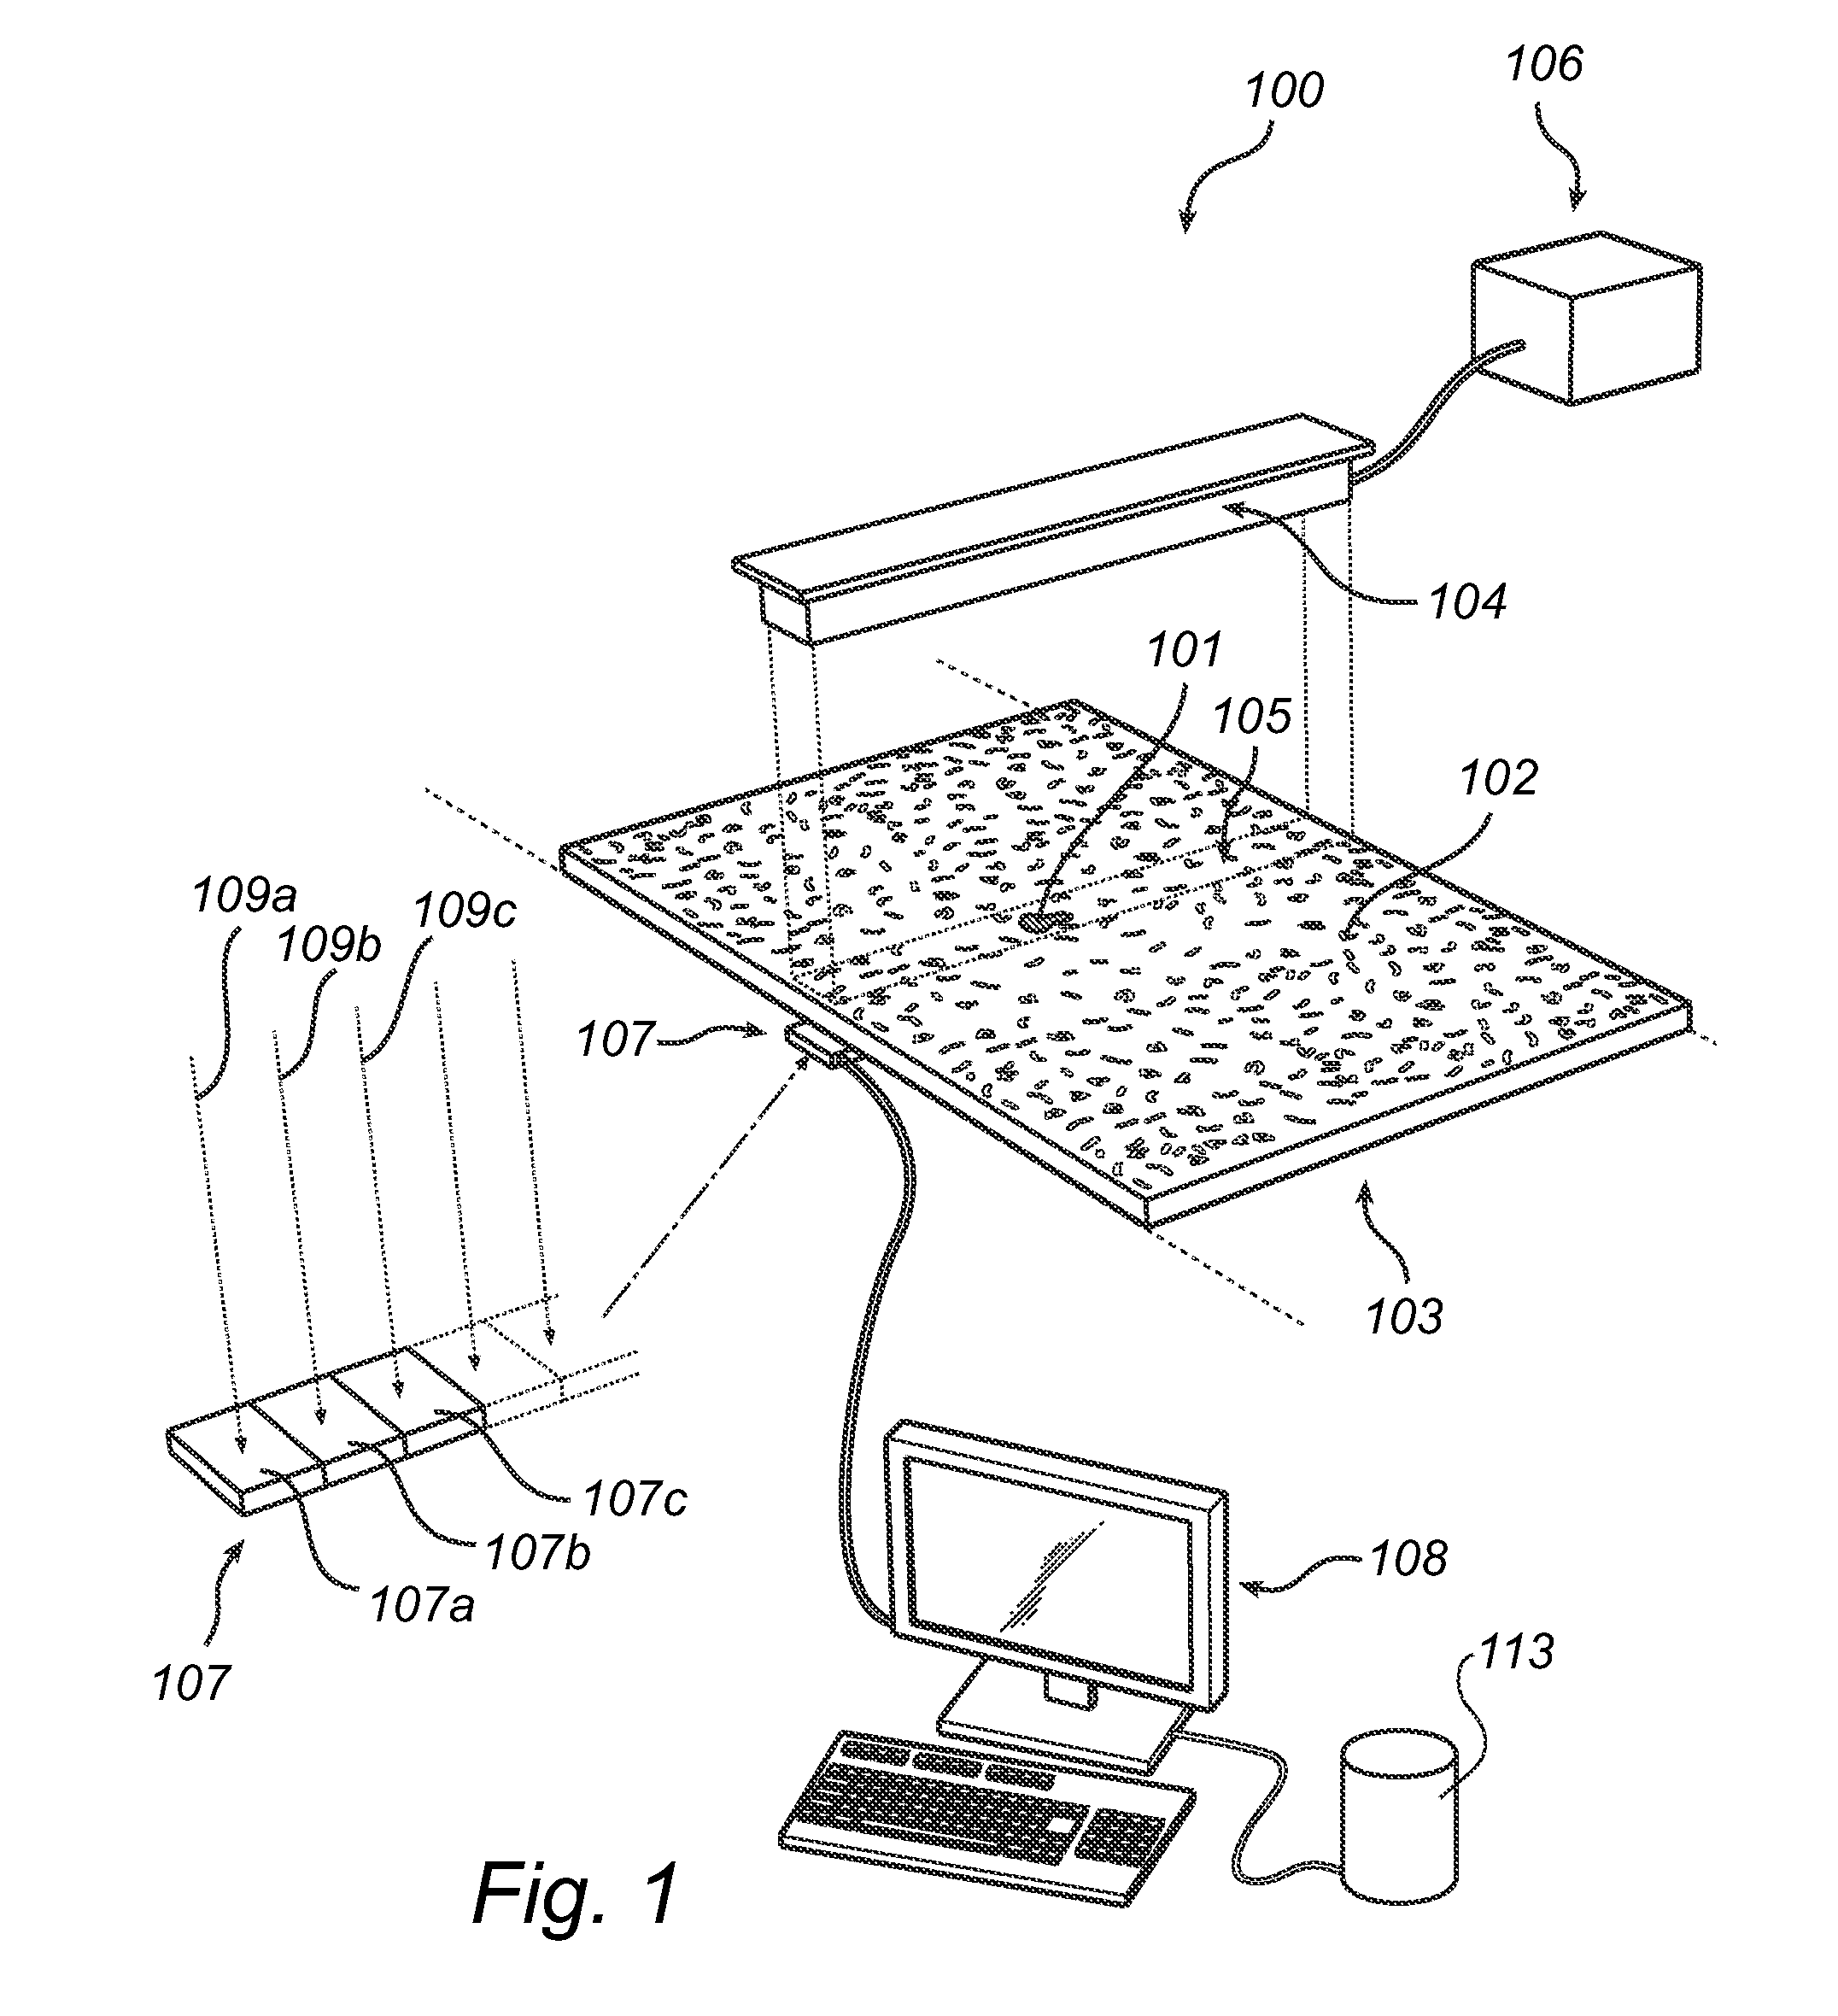 Method and apparatus for estimating the ash content of a biological material